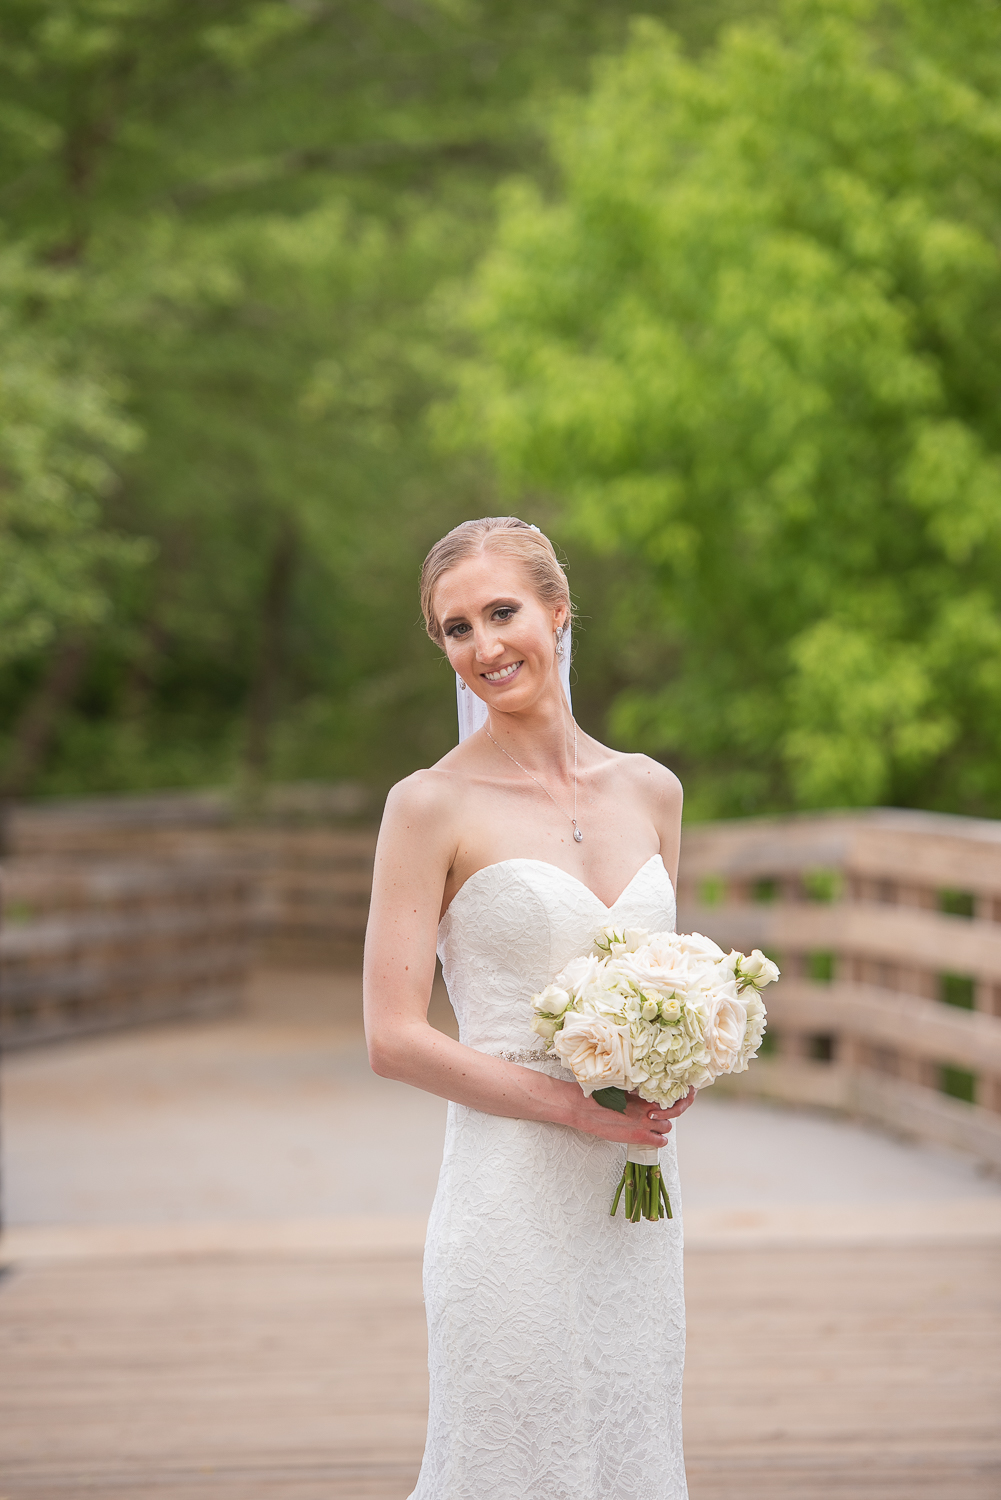 Roswell River Landing, St. Peter Chanel, Roswell Wedding Venue, Roswell GA Wedding Photographer, Atlanta Wedding Photographer, Roswell Wedding Photographer, Georgia Wedding Photographer, Wedding Photographer Atlanta, Woodstock Wedding Photographer, Alpharetta Wedding Photographer, North Georgia Wedding Photographer, Cumming Wedding Photographer, Marietta Wedding Photographer, Roswell Wedding Venue, Roswell GA Wedding Venue